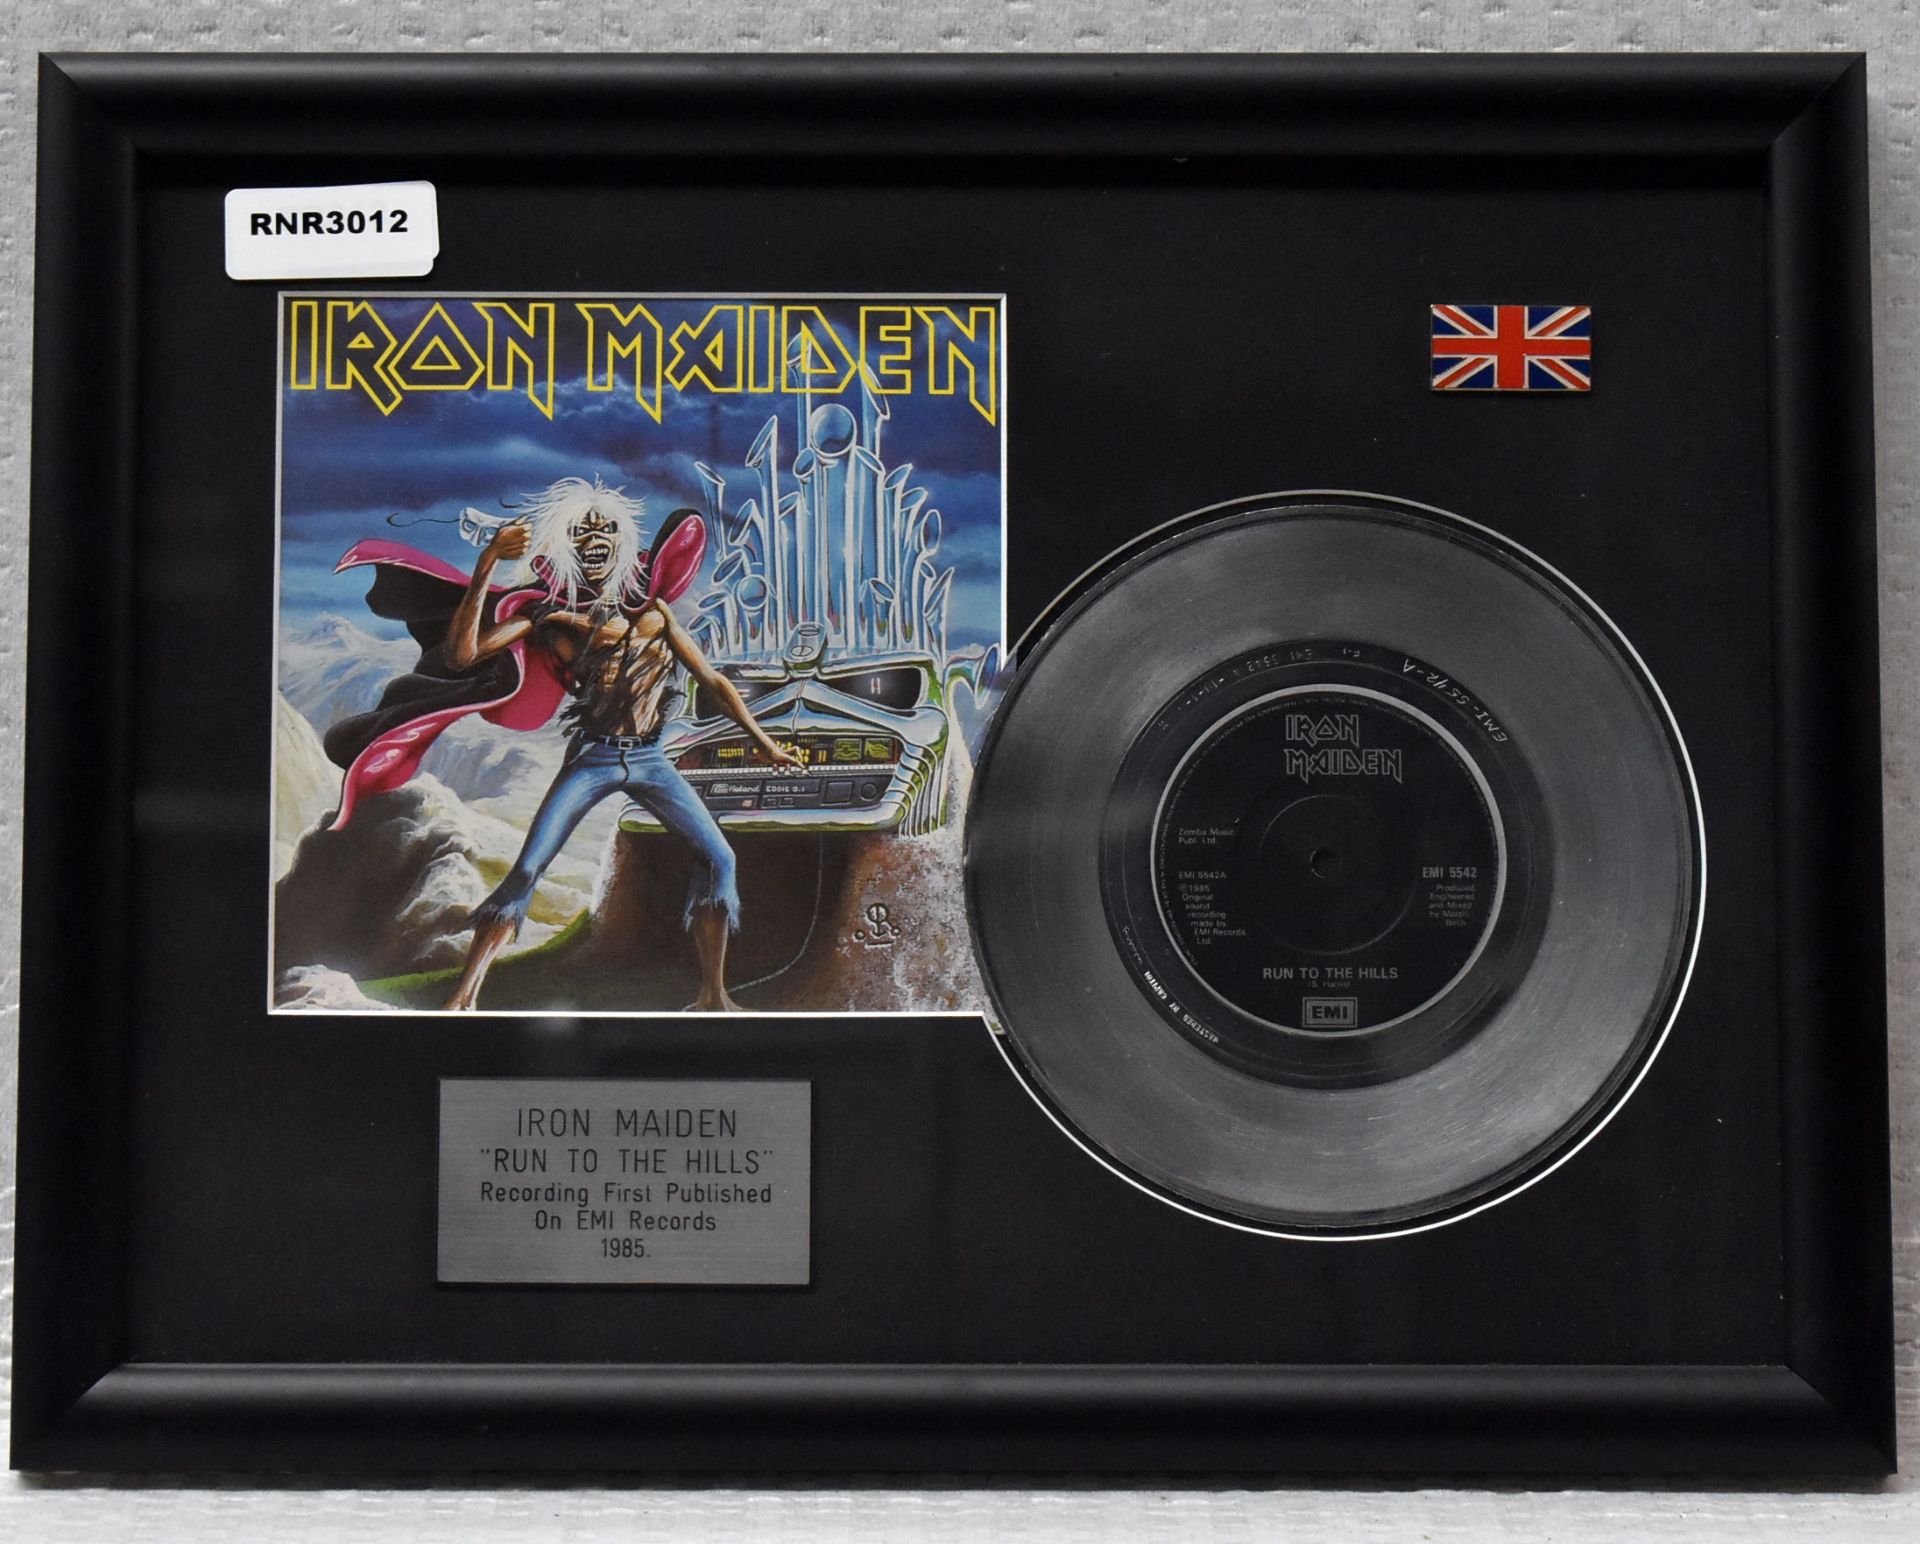 1 x IRON MAIDEN - Run To The Hills On Emi Records Framed 7 Inch Vinyl